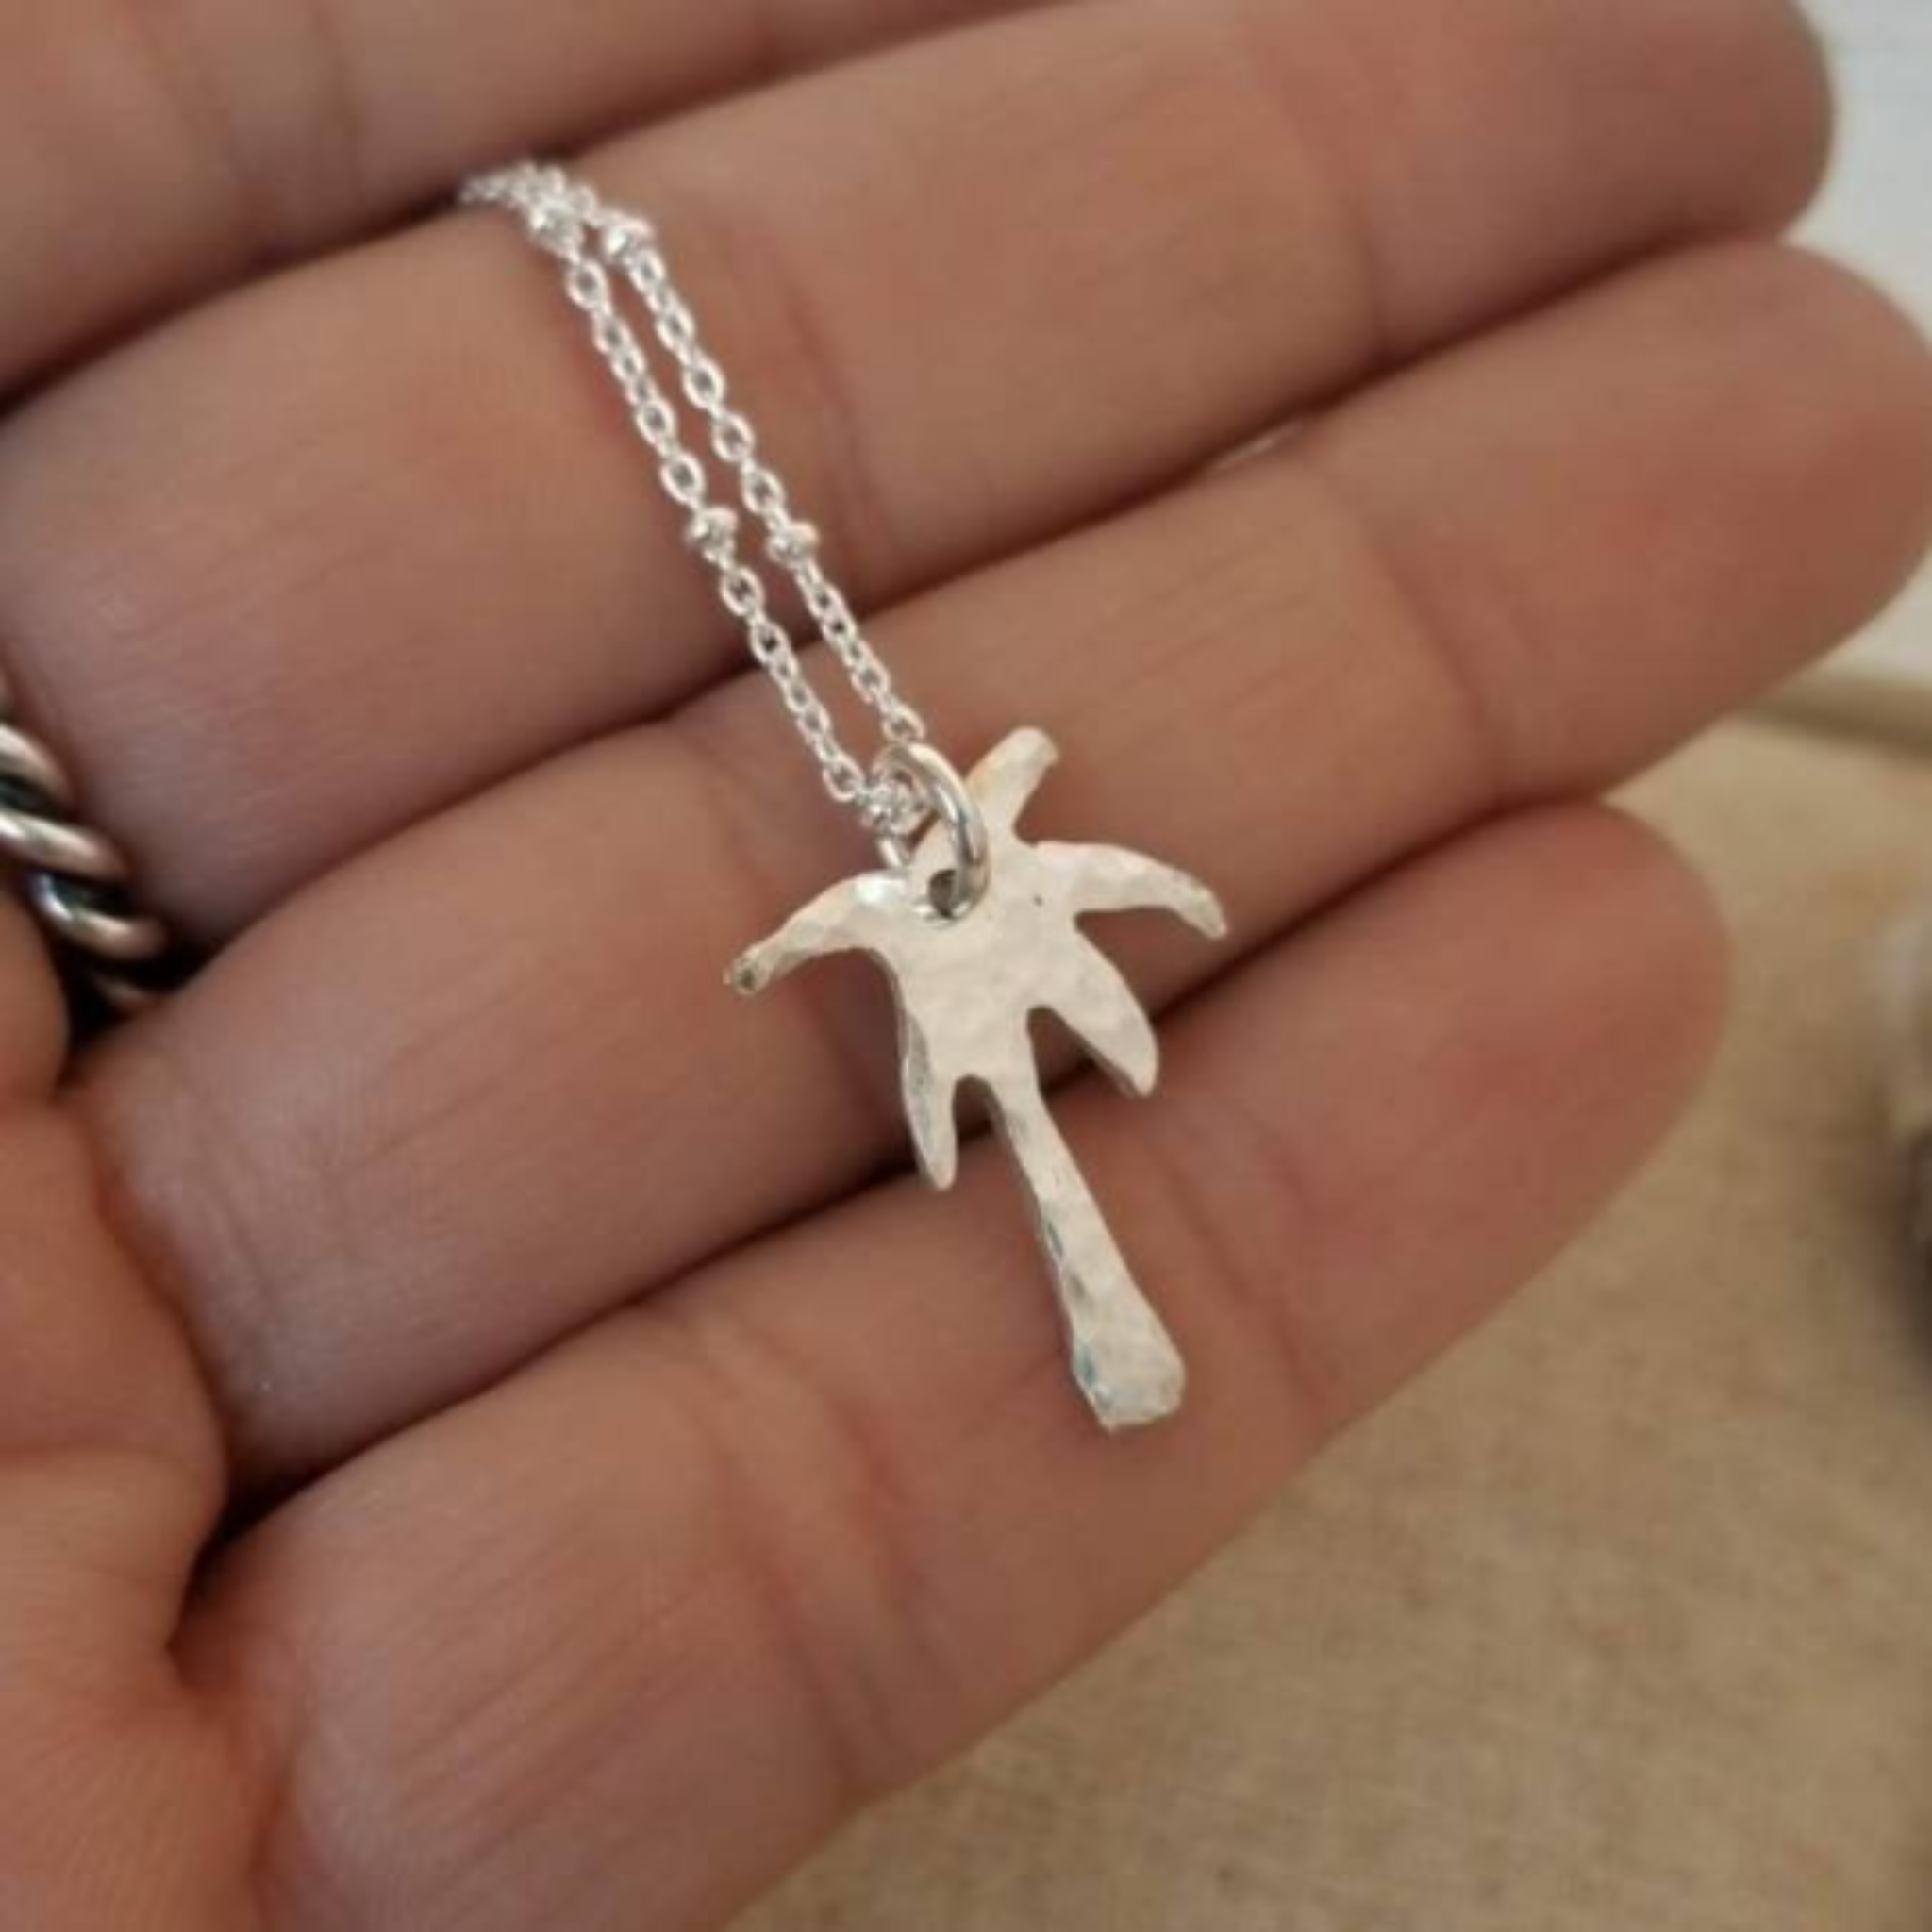 Palm Tree, Pineapple or Whale Tail Disc Necklace - Sterling Silver